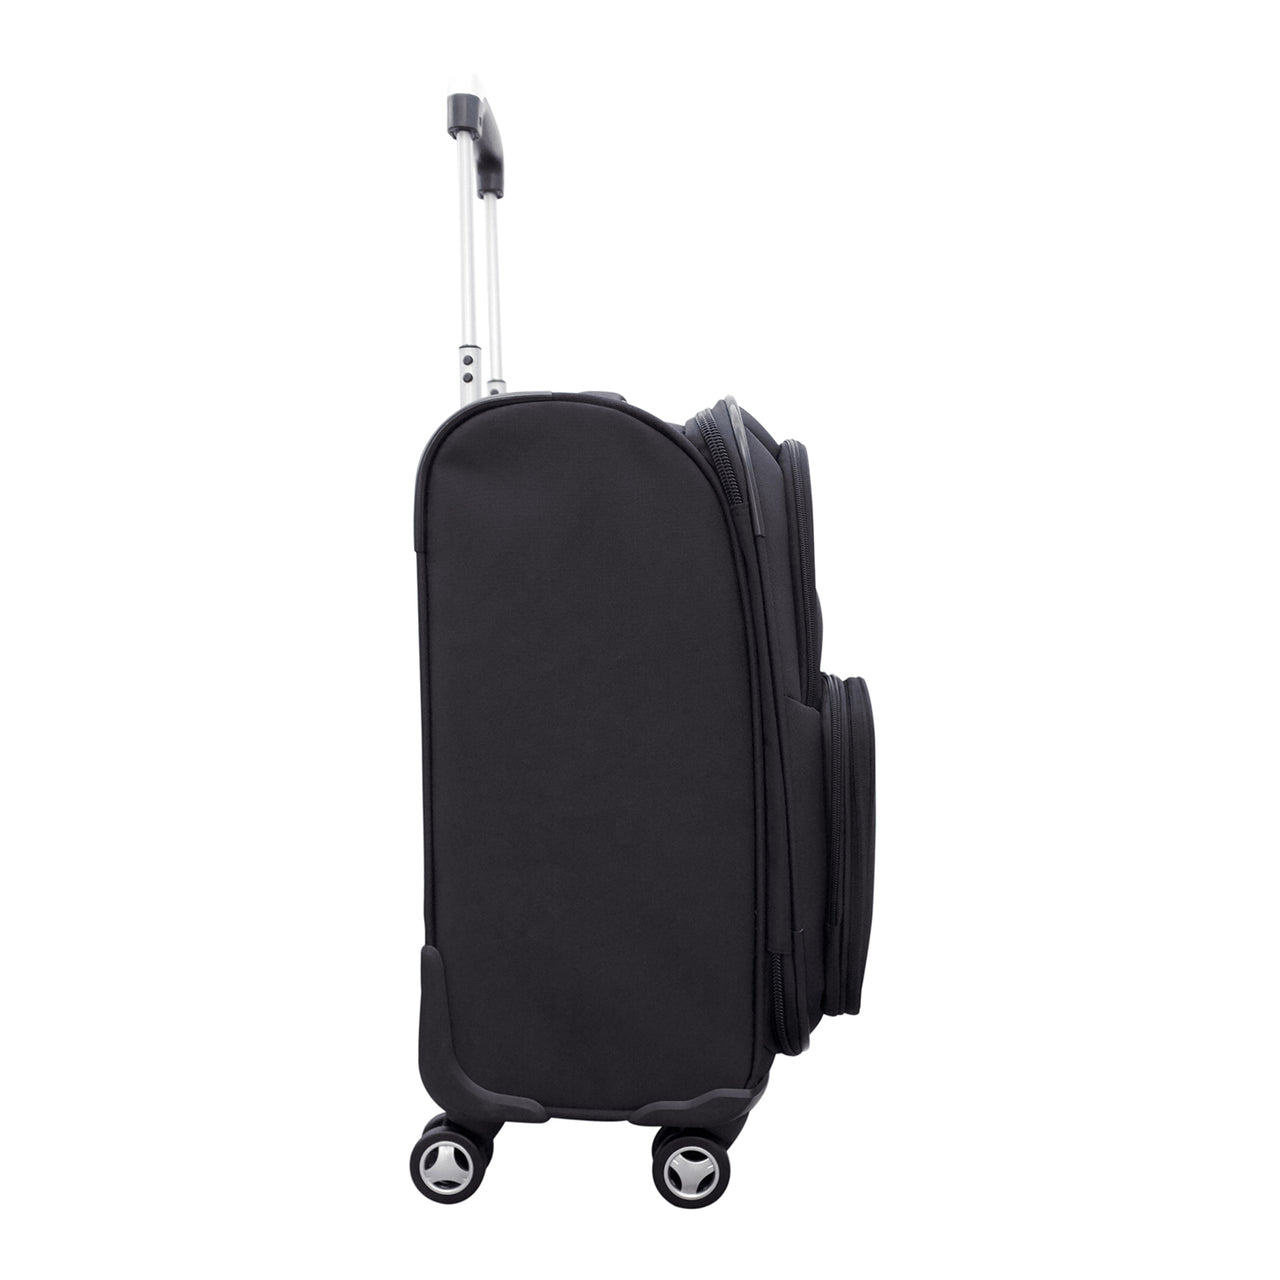 Detroit Lions 21" Carry-on Spinner Luggage